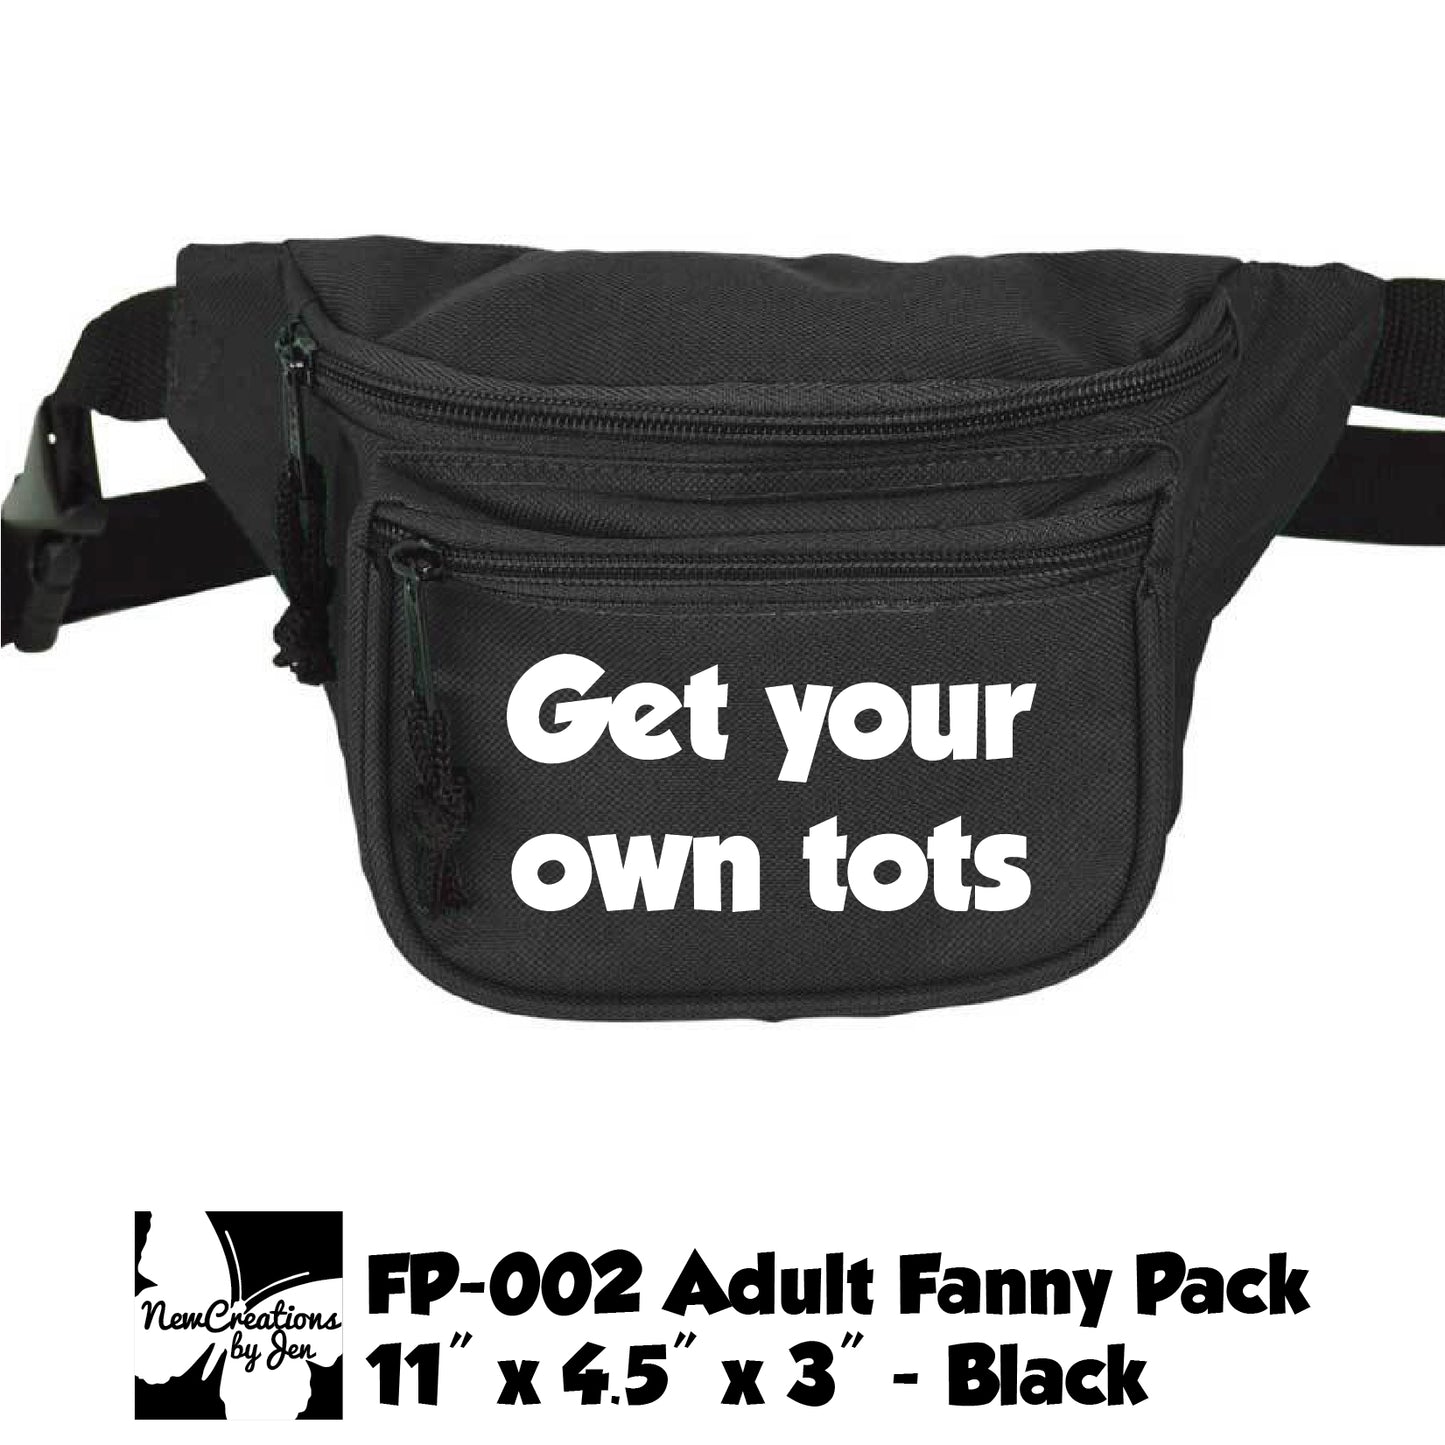 Fanny Pack with 3 Pockets